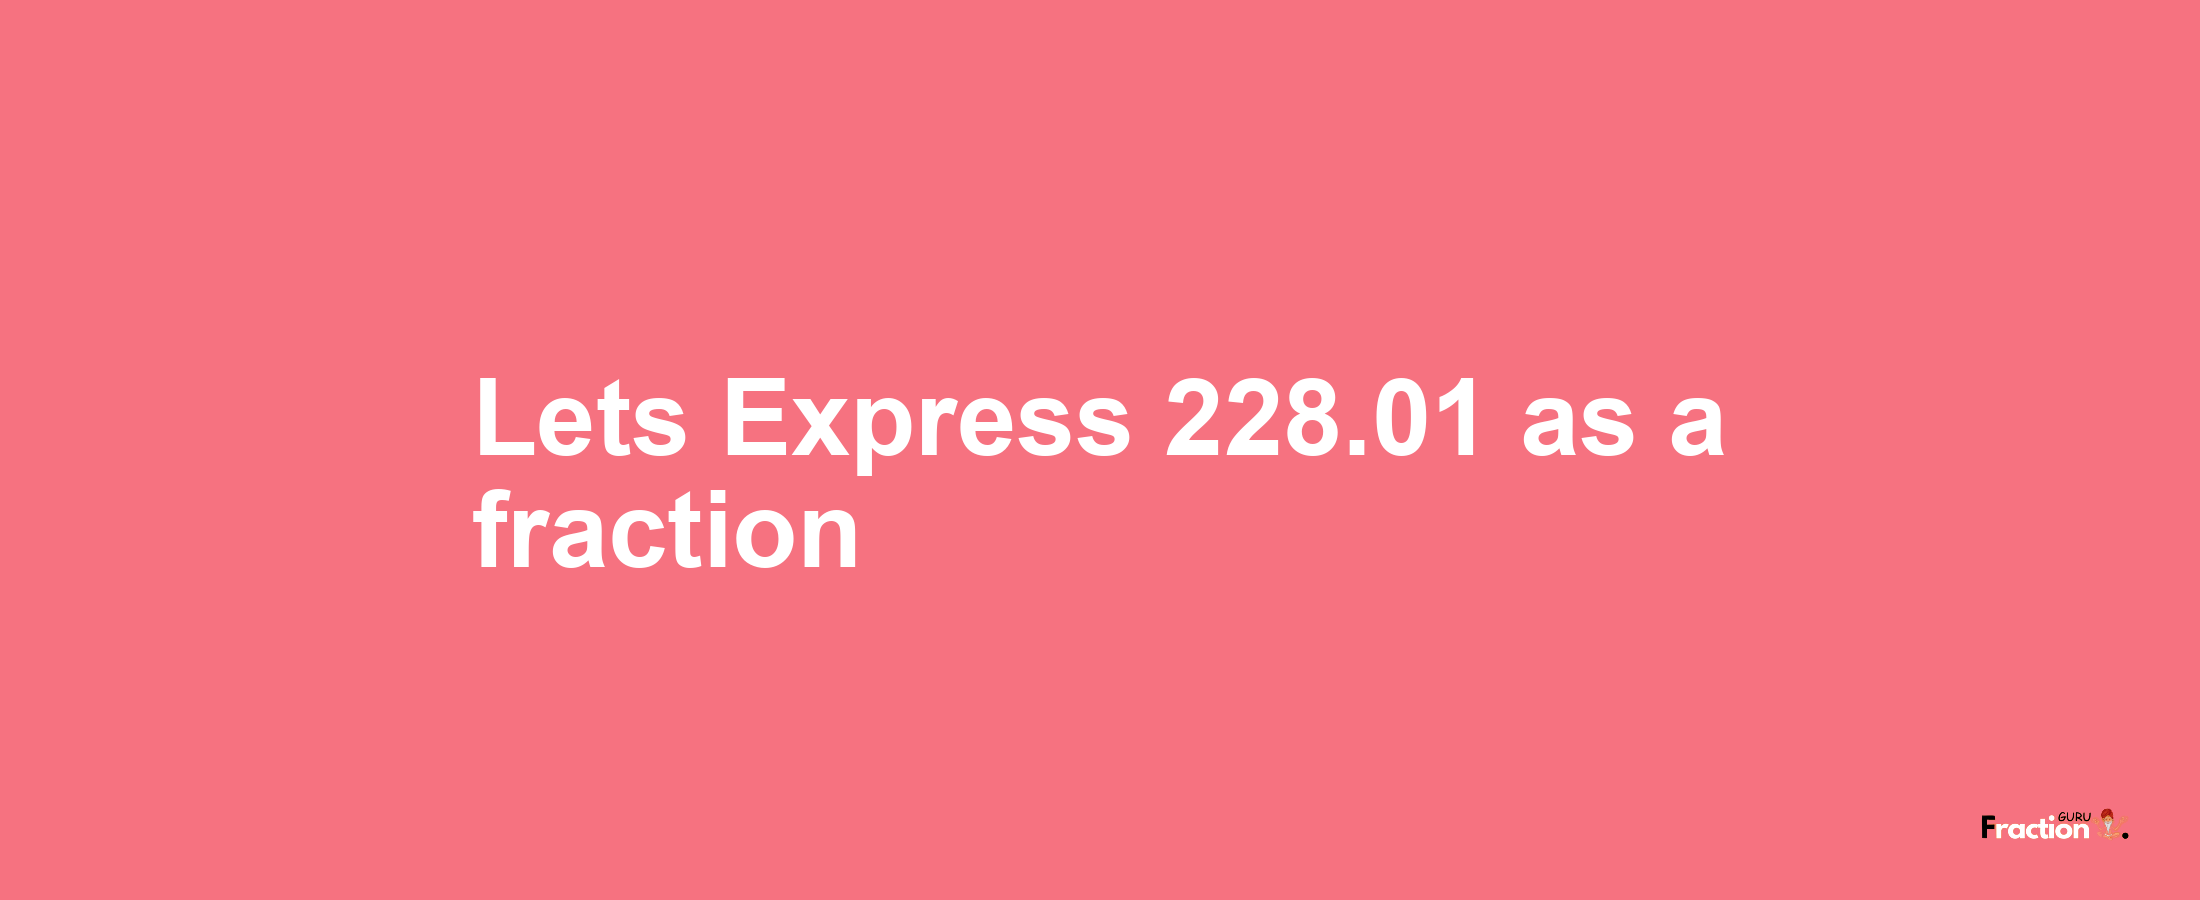 Lets Express 228.01 as afraction